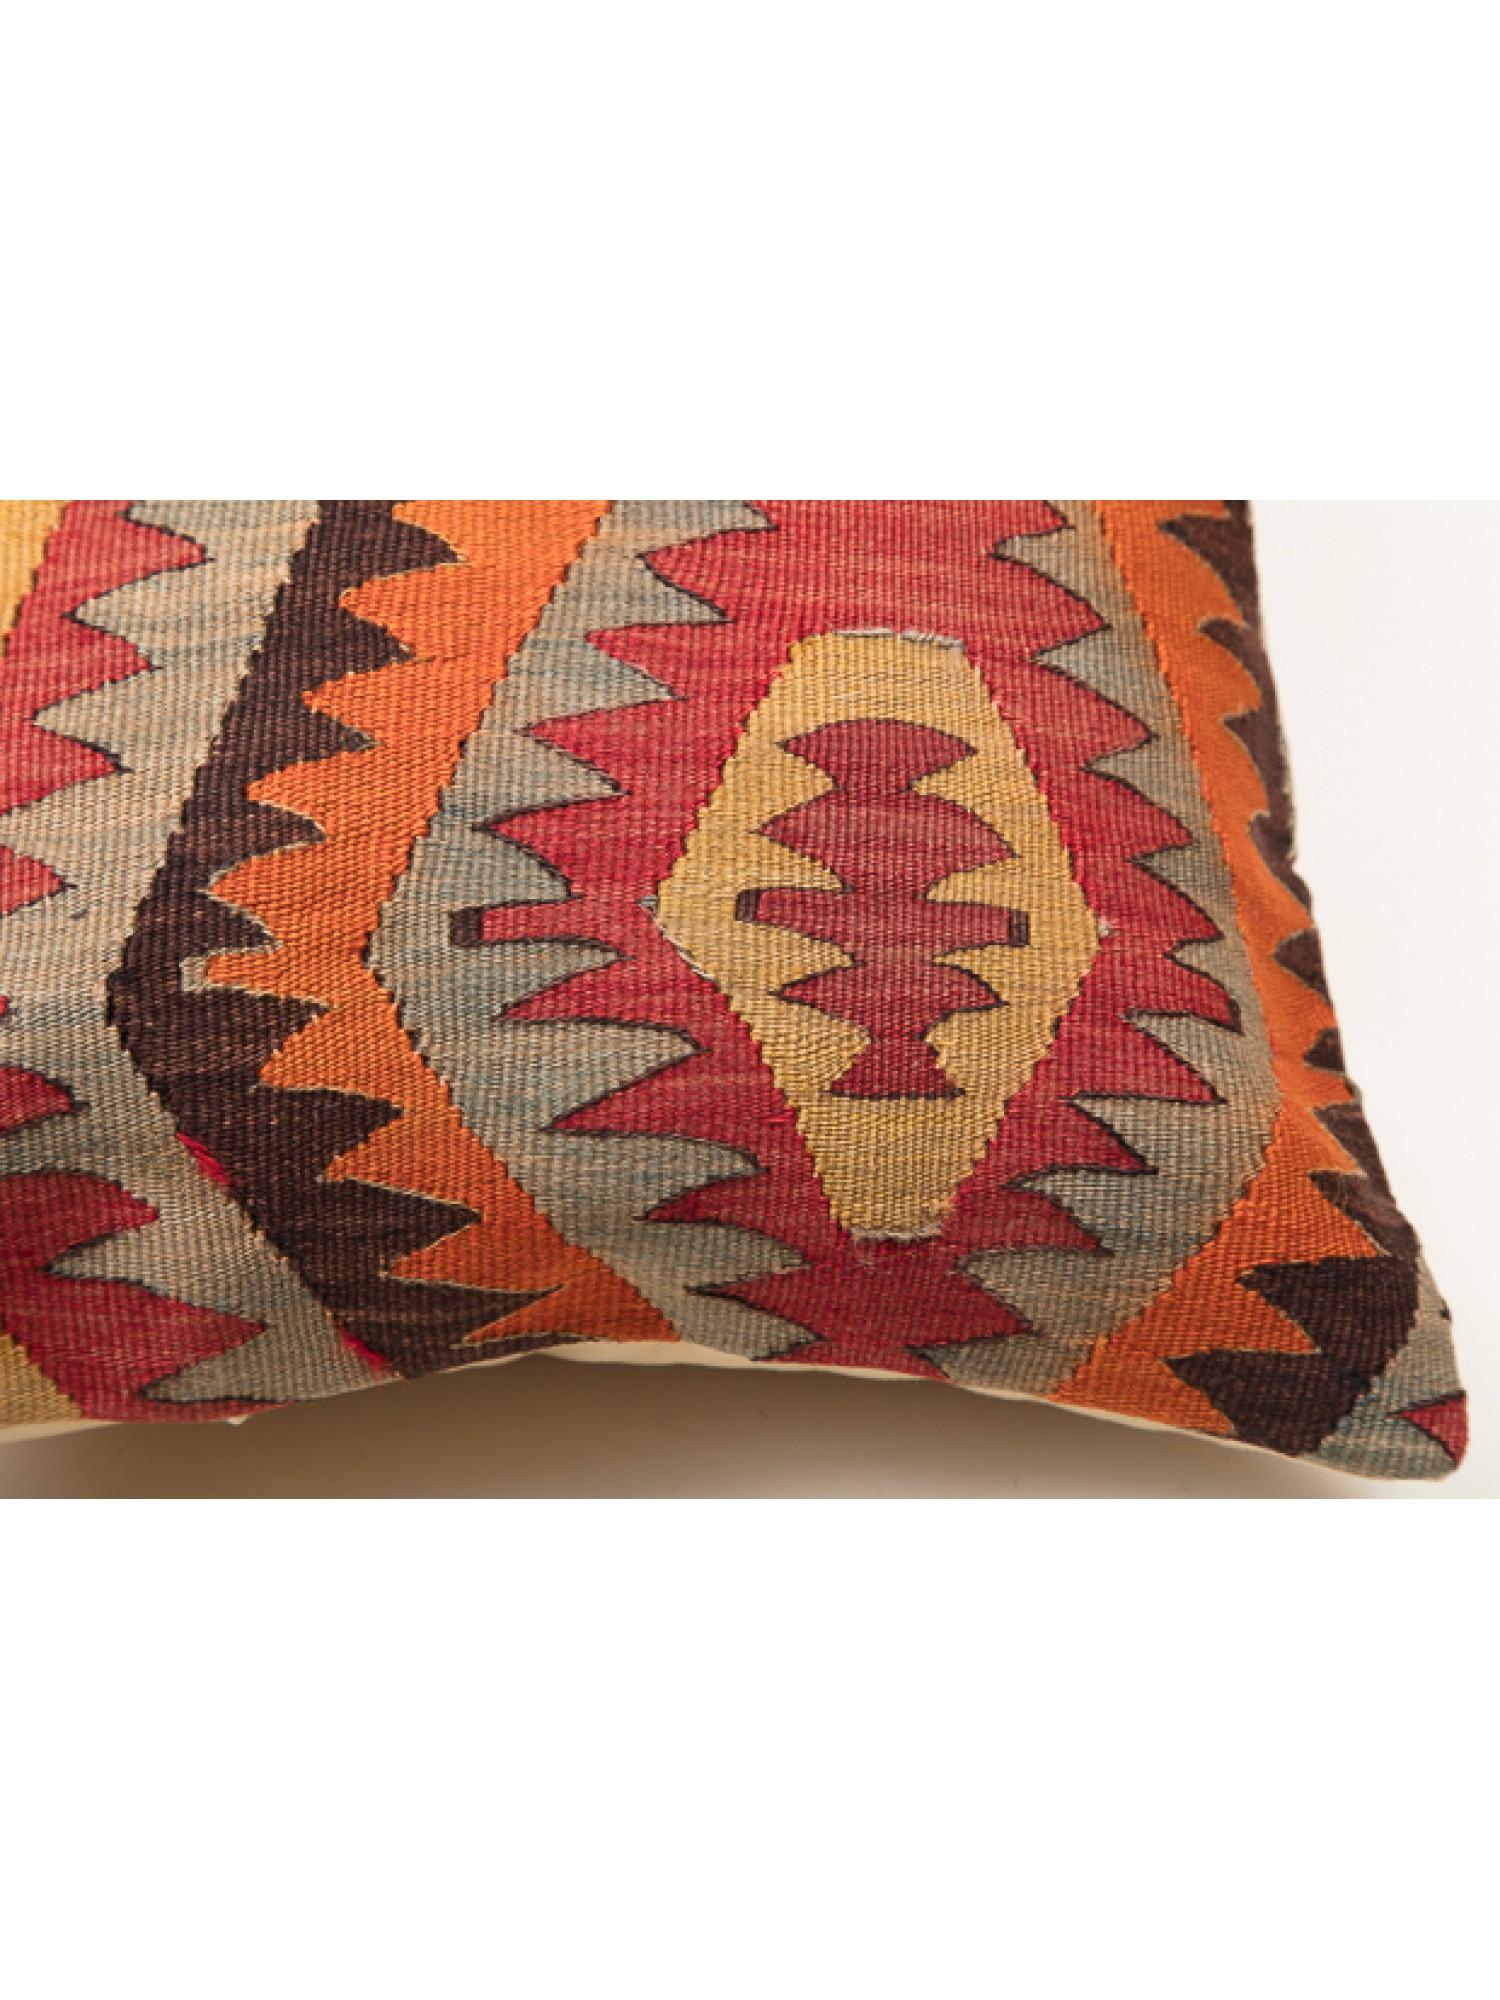 Antique & Old Kilim Cushion Cover, Anatolian Yastik Turkish Modern Pillow KC3034 In Good Condition For Sale In Tokyo, JP